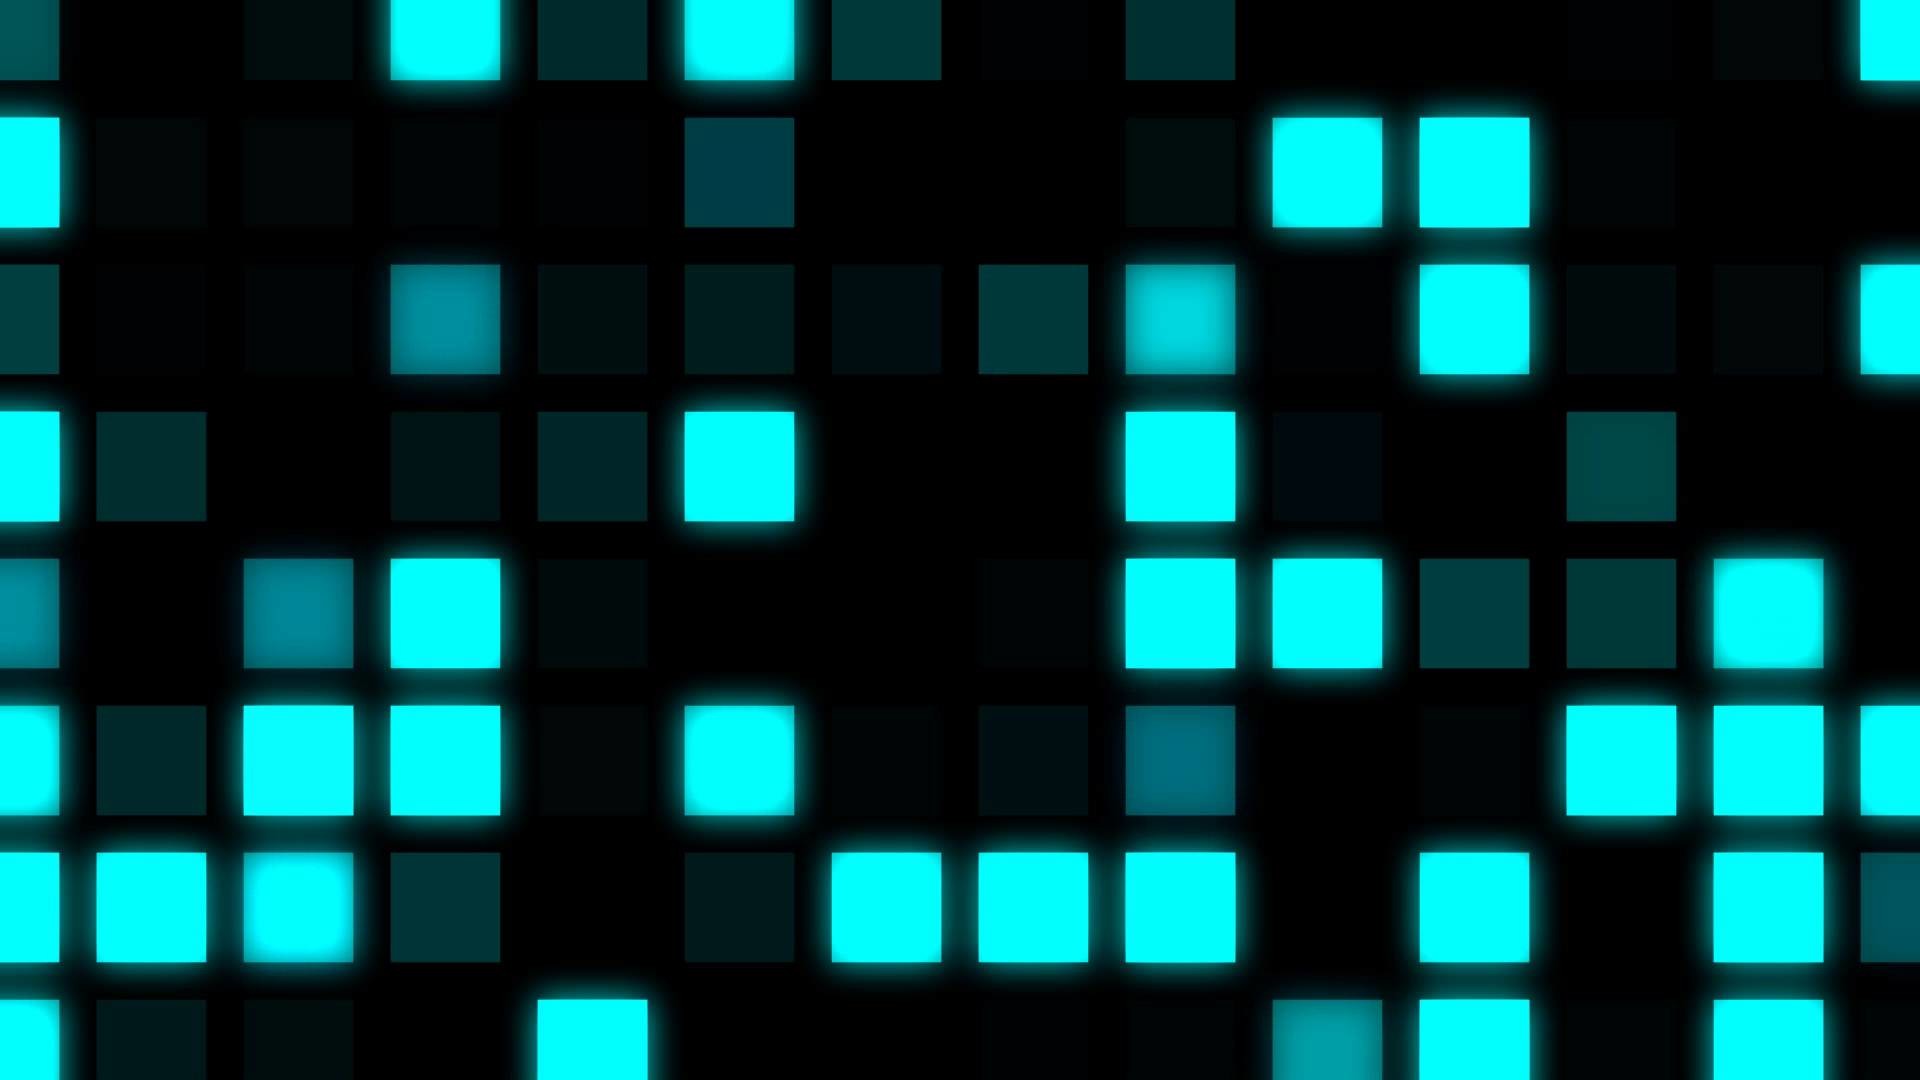 1920x1080 Videogame Background ANIMATION FREE FOOTAGE HD Big Pixel Cyan square -  YouTube